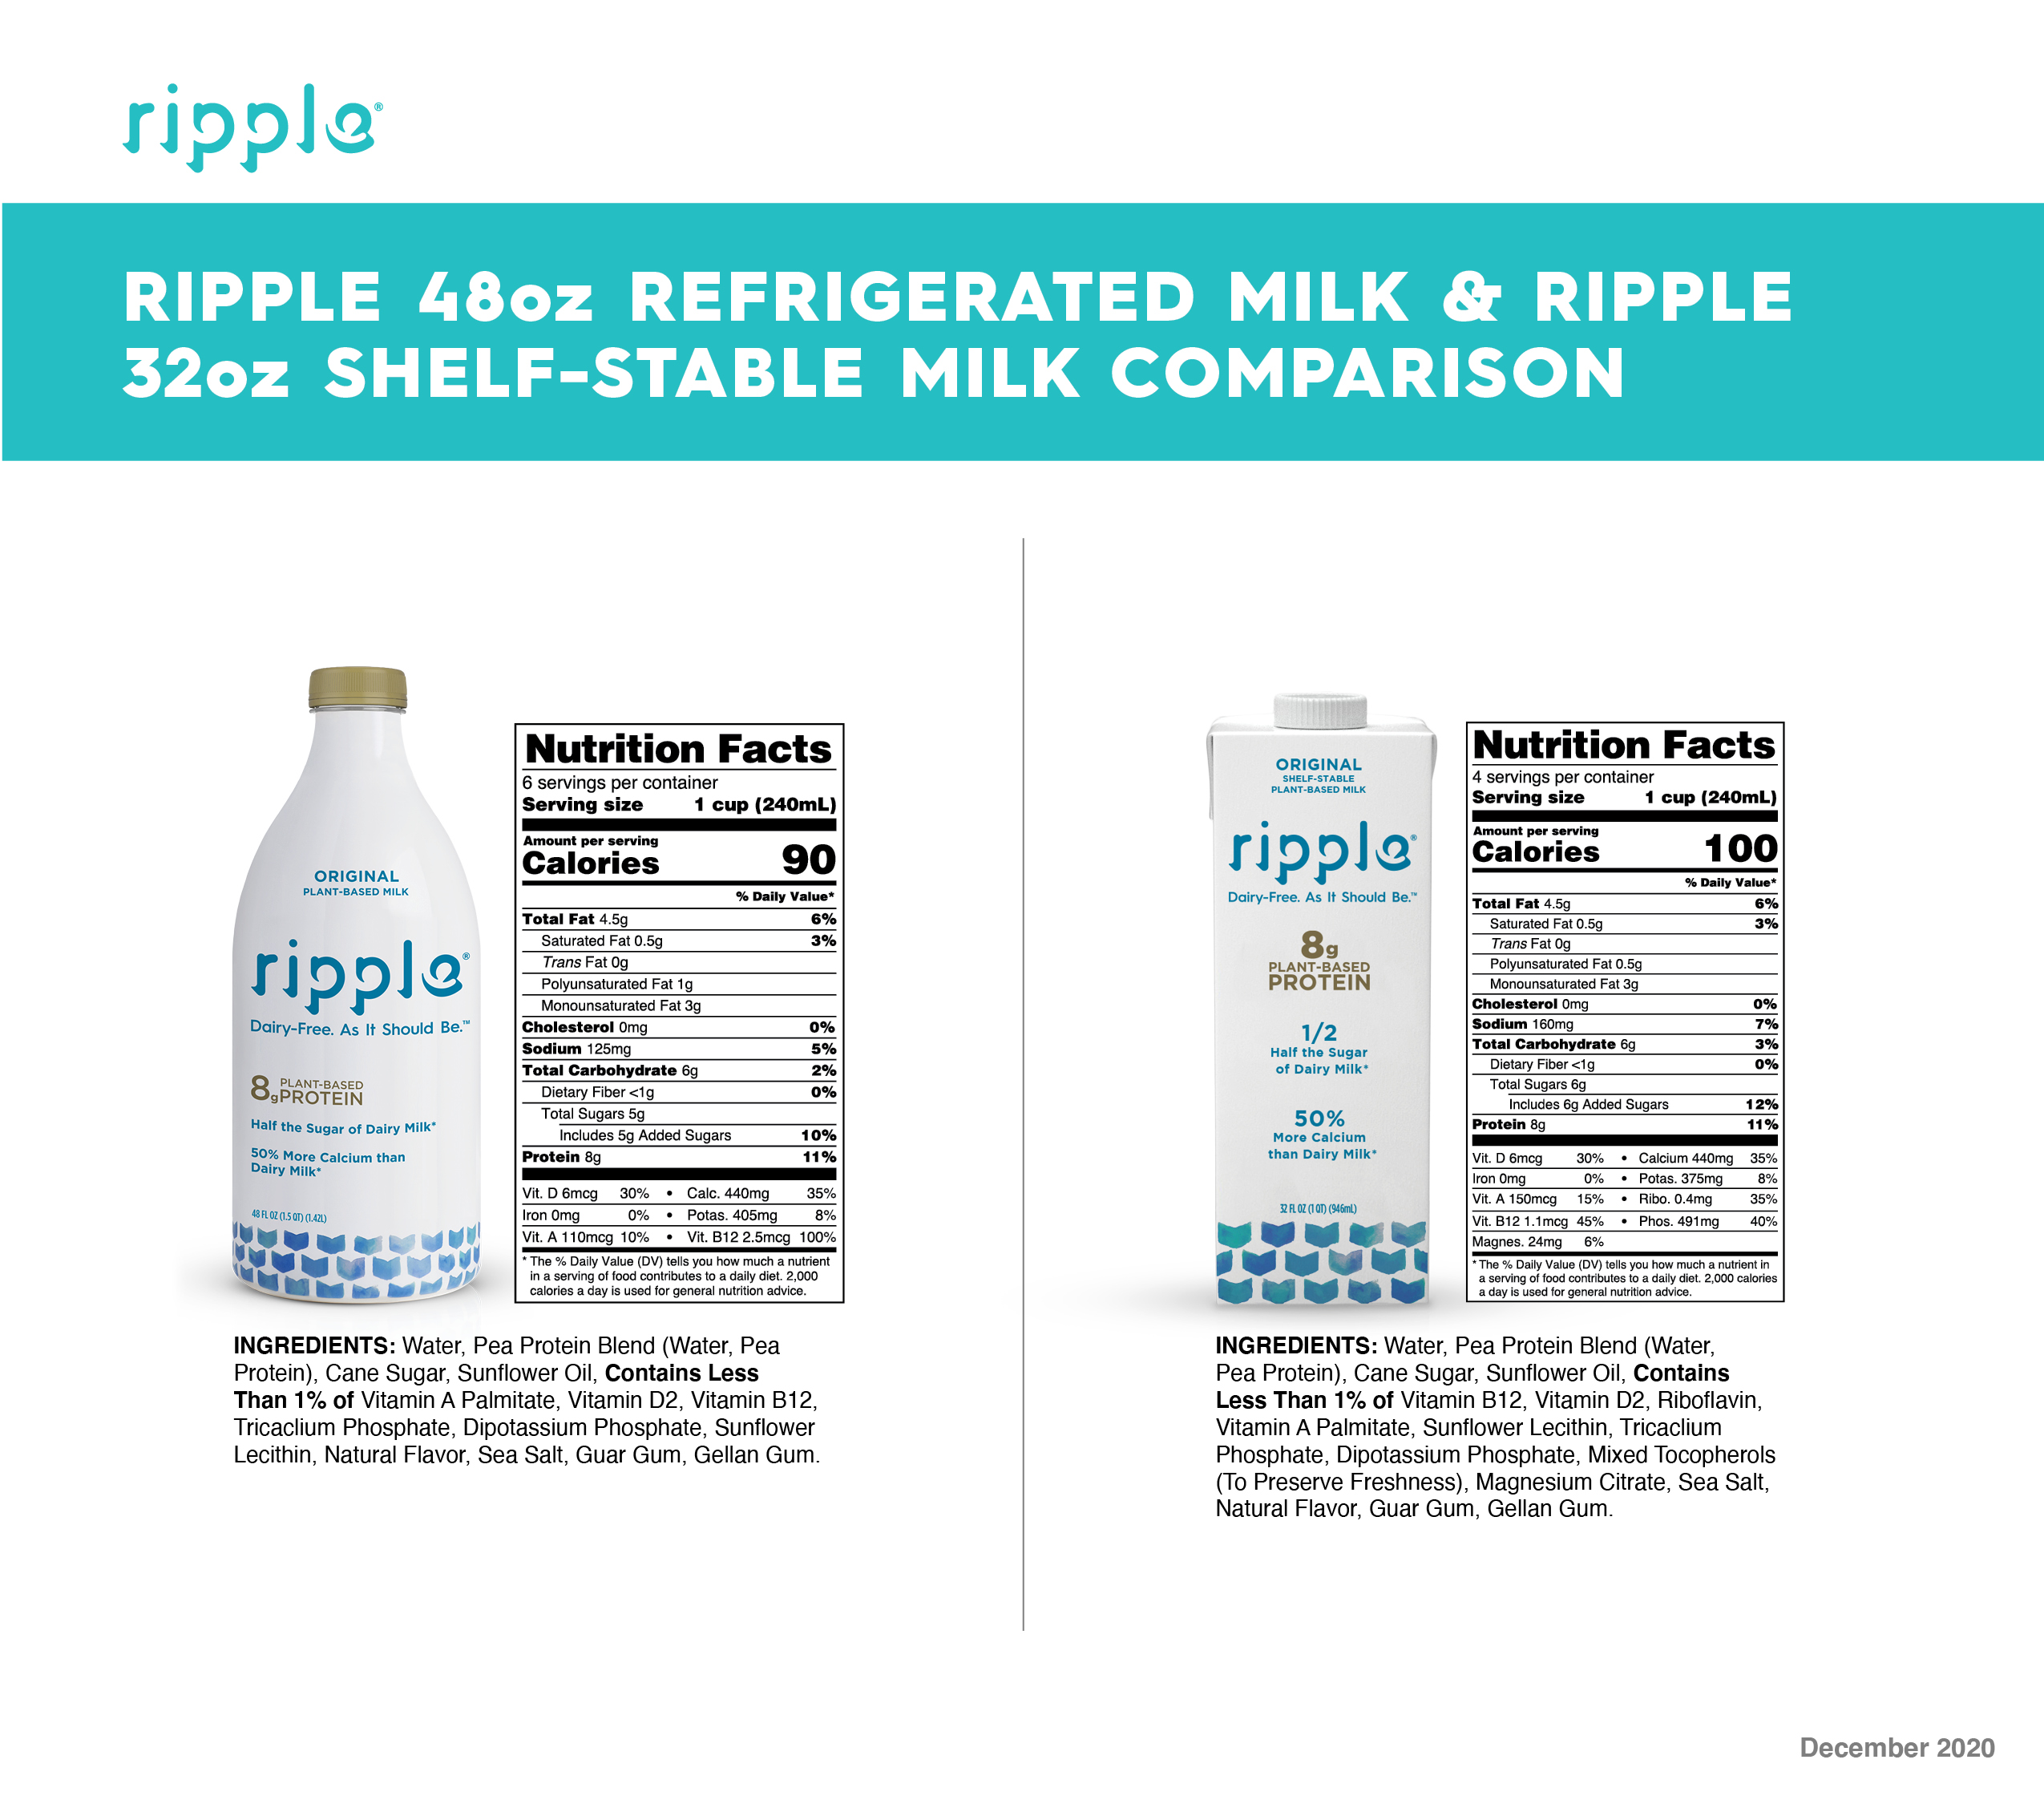 Is ripple safe for babies